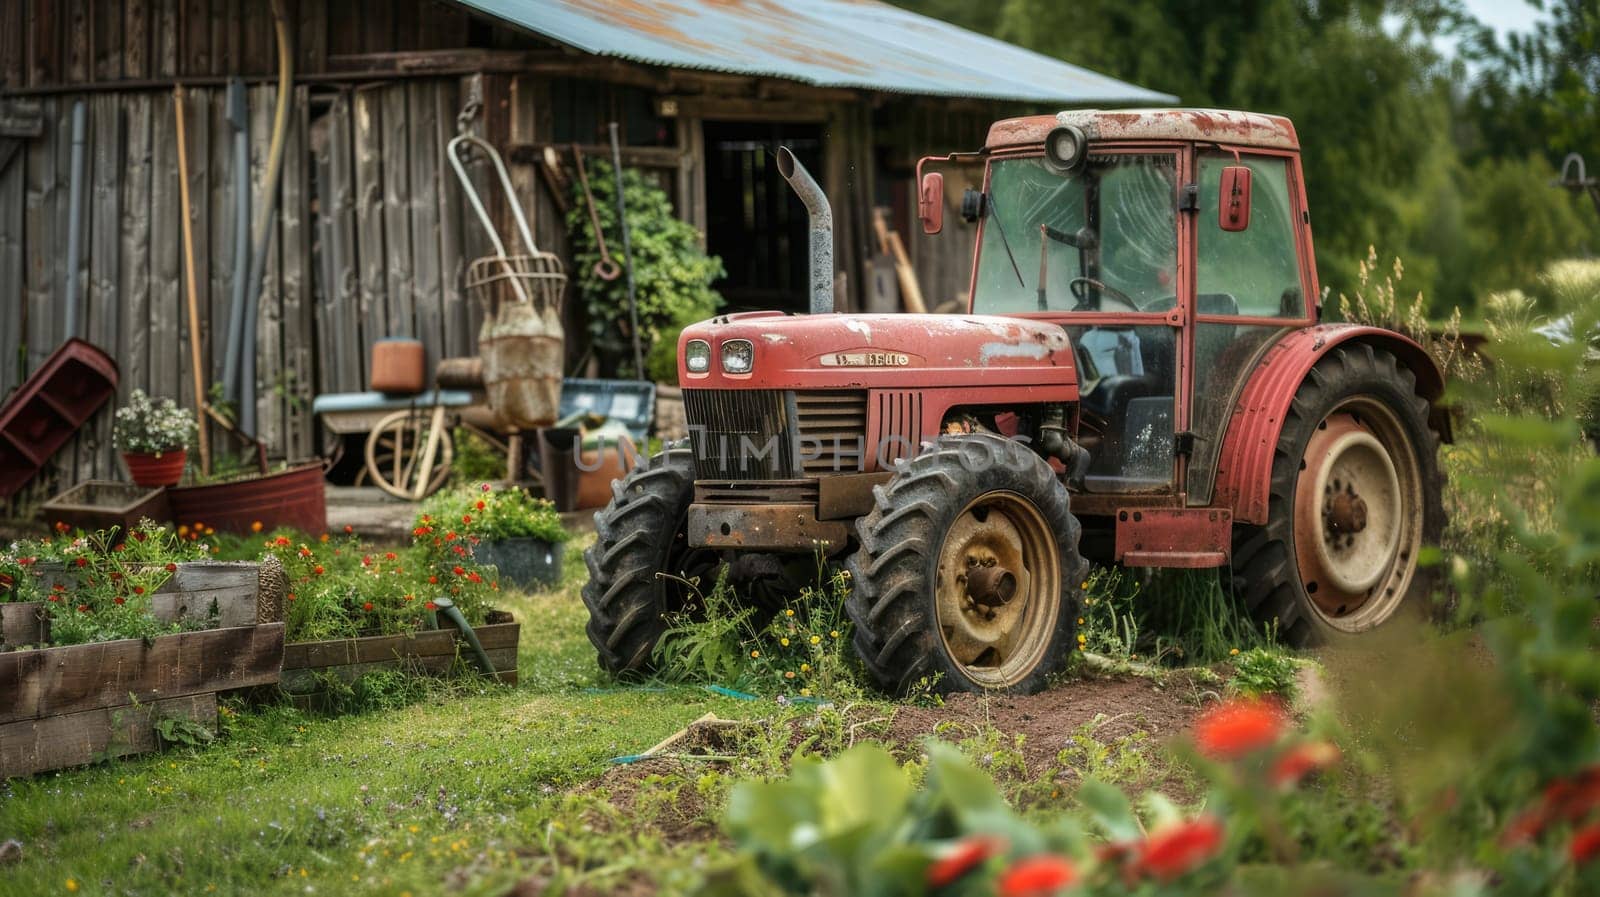 Tractor and garden tools for farmer by natali_brill